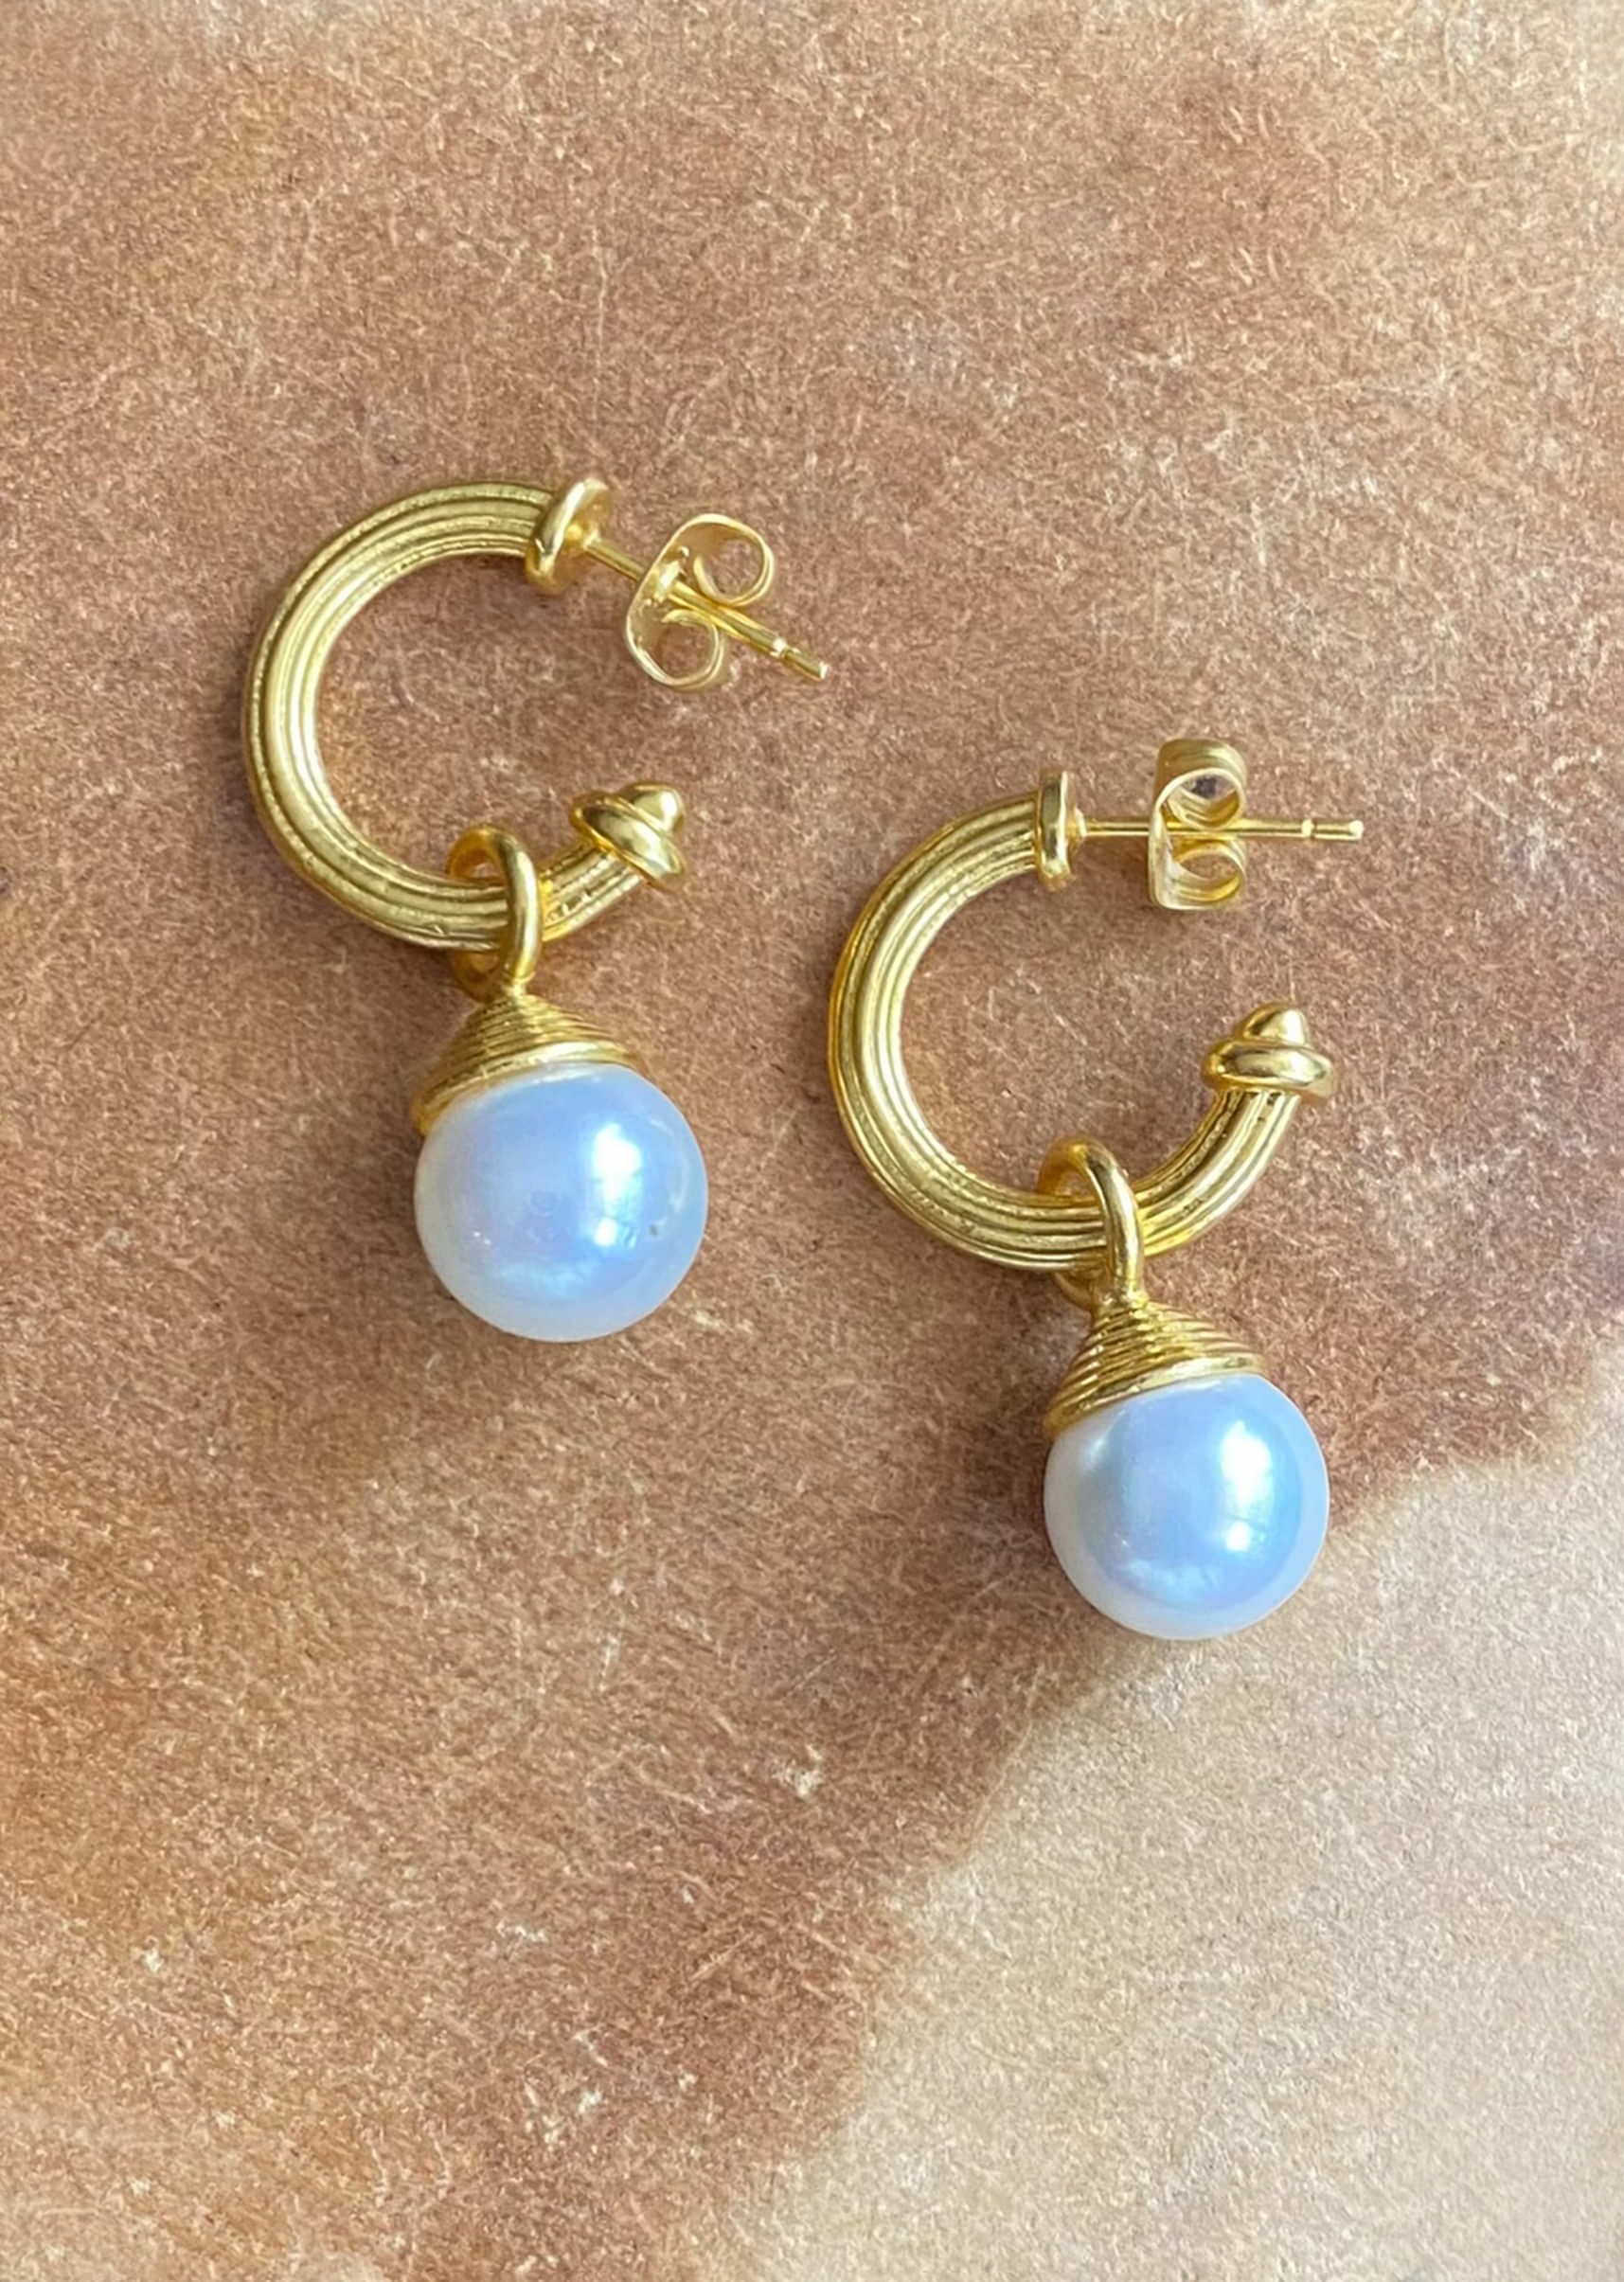 Gold Plated Earrings With Freshwater Pearl Drops